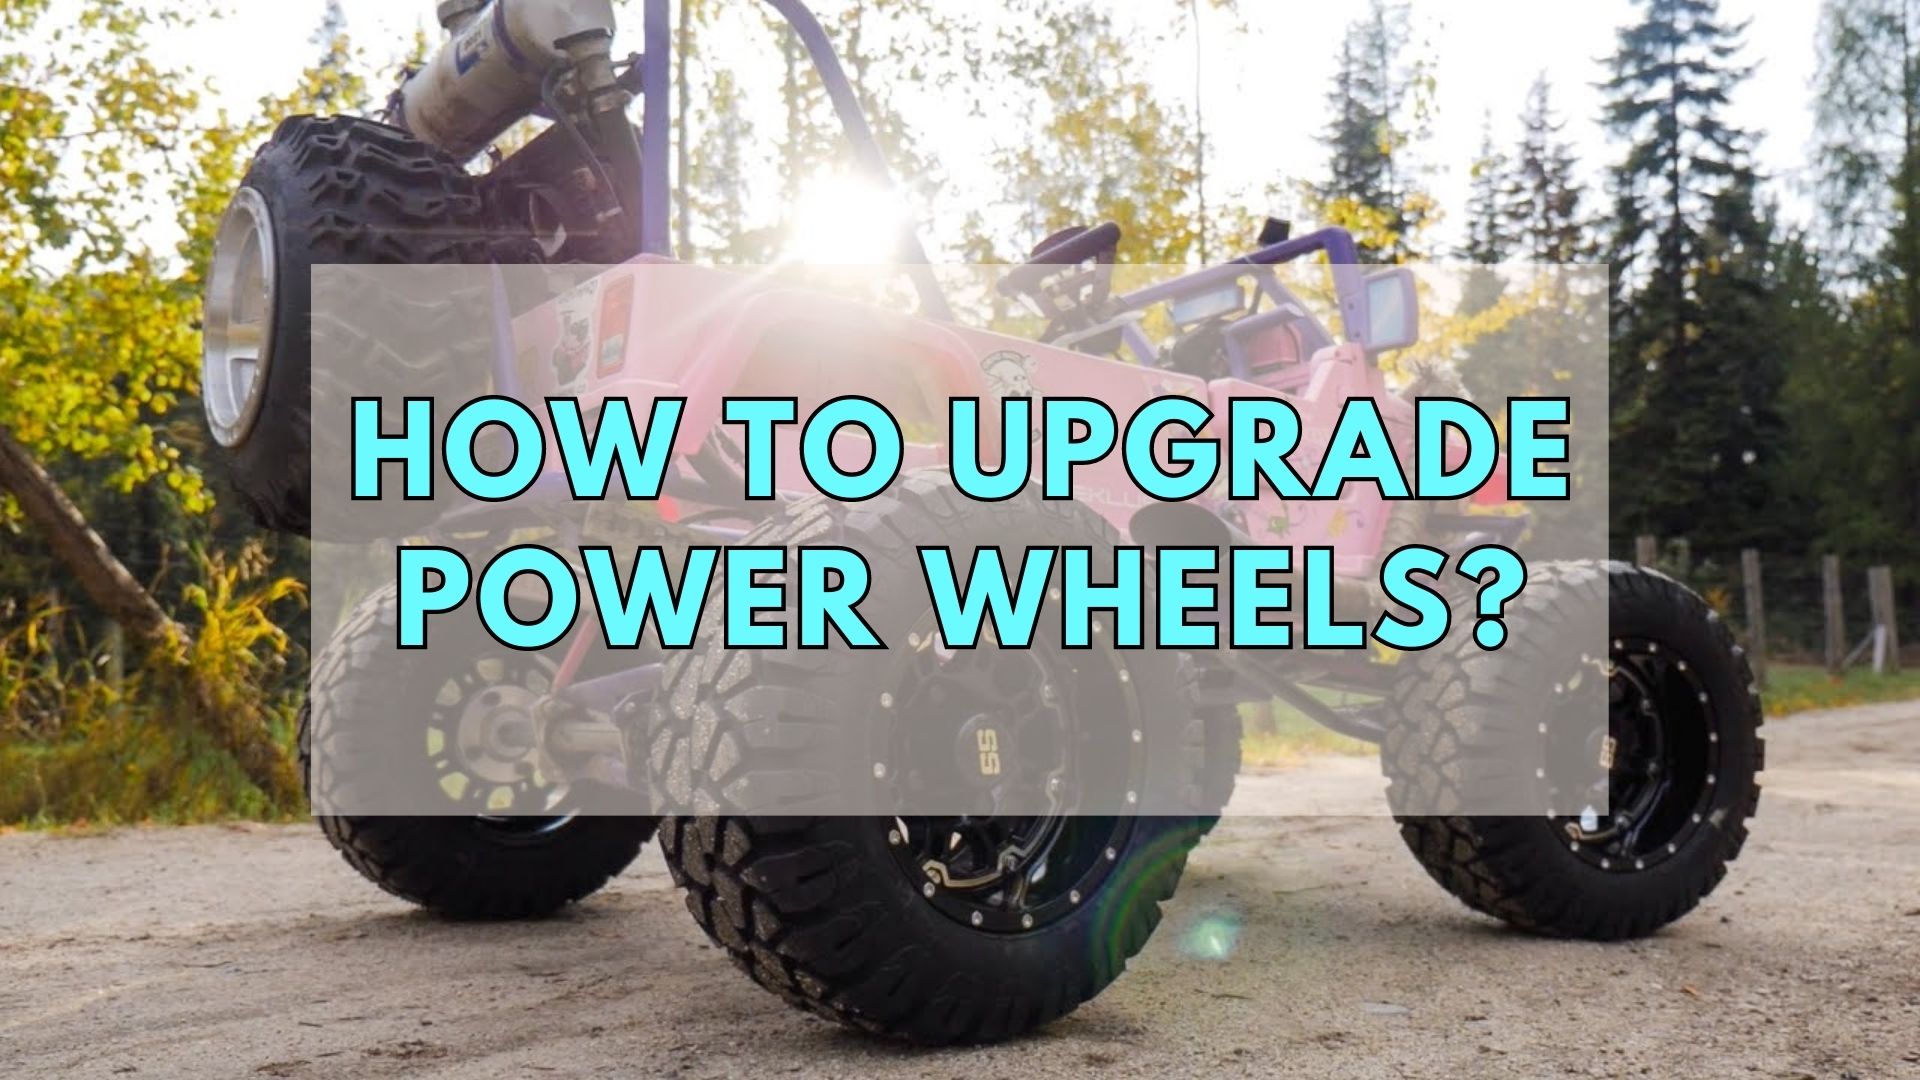 How To Upgrade Power Wheels